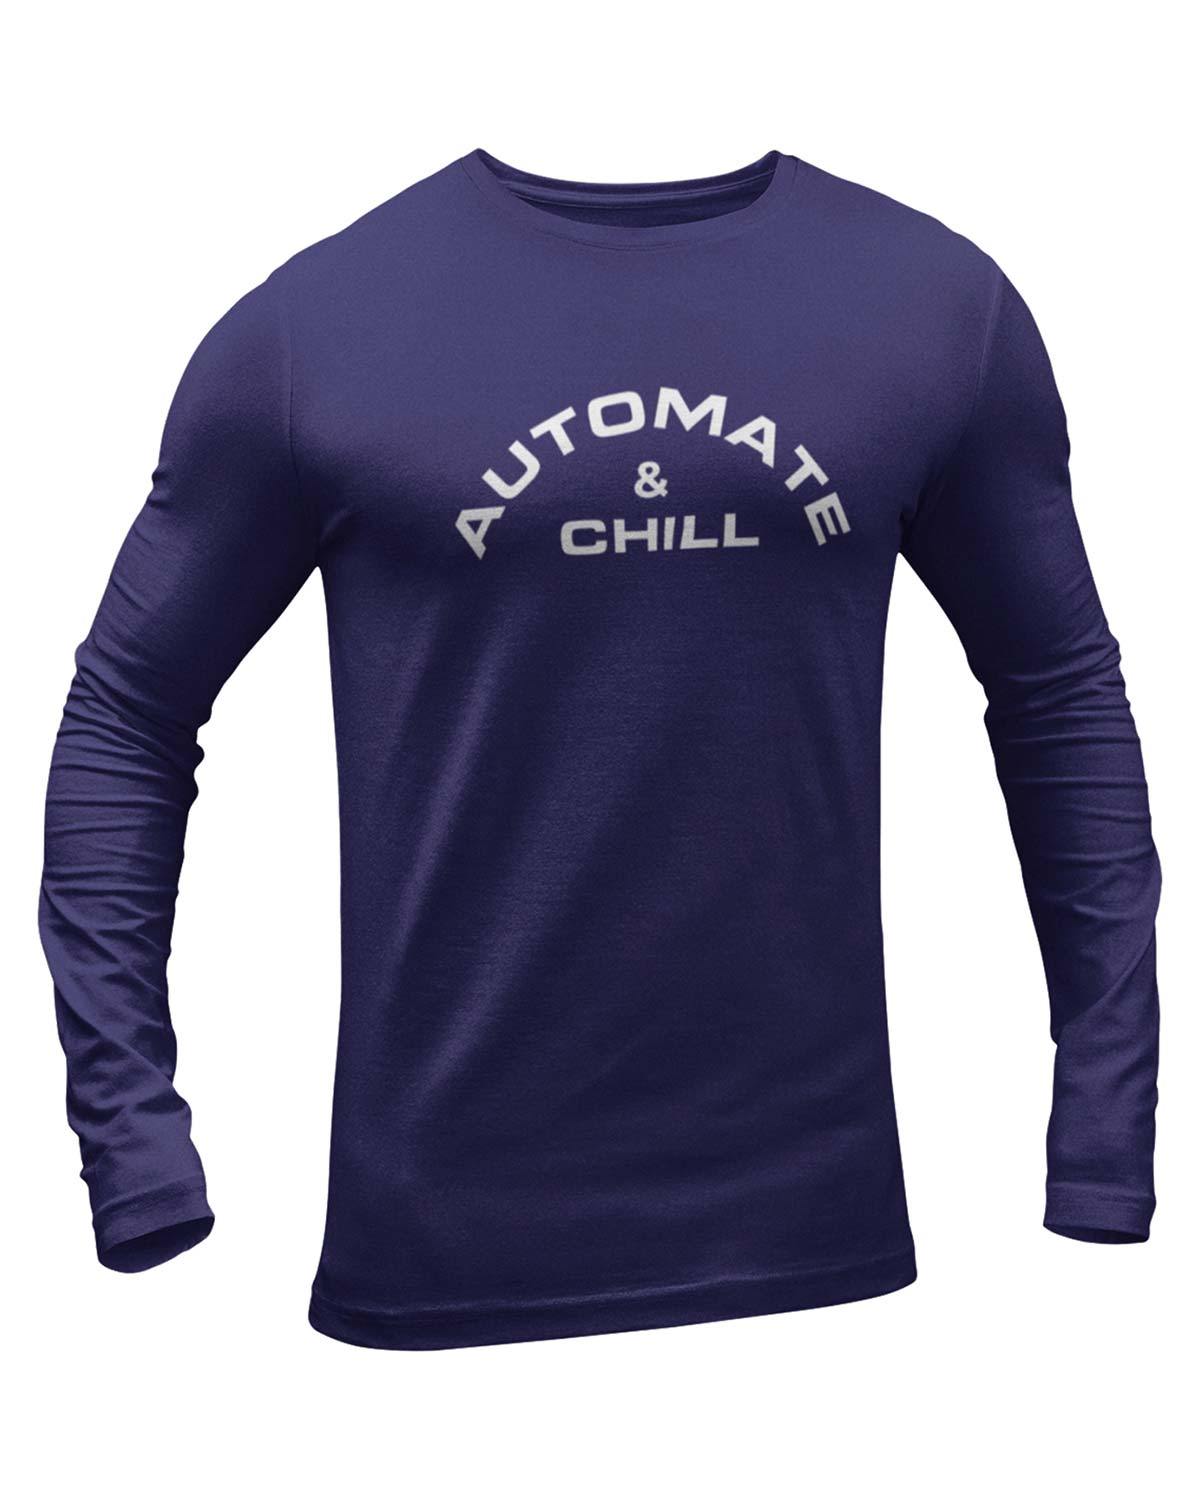 Automate And Chill Full Sleeve Geek T-Shirt - DudeMe